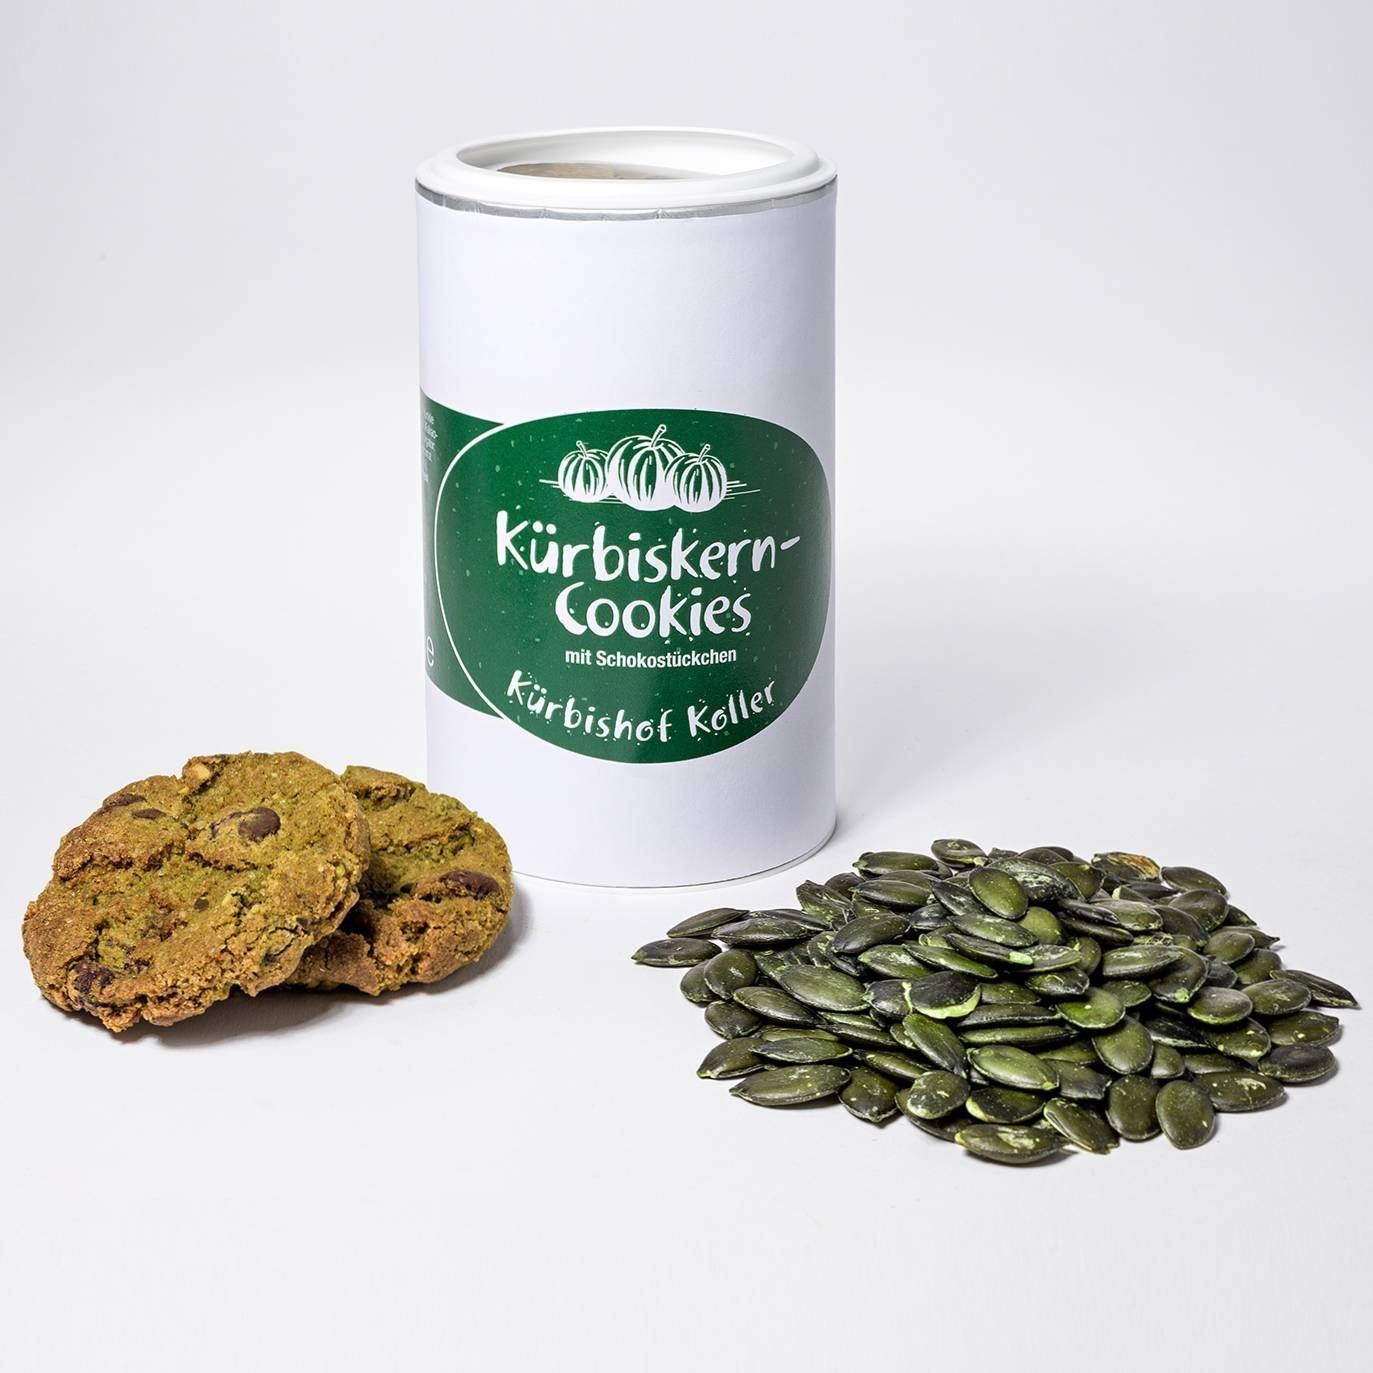 Pumpkin Seed Cookies with Chocolate Chips on the Turks and Caicos Islands